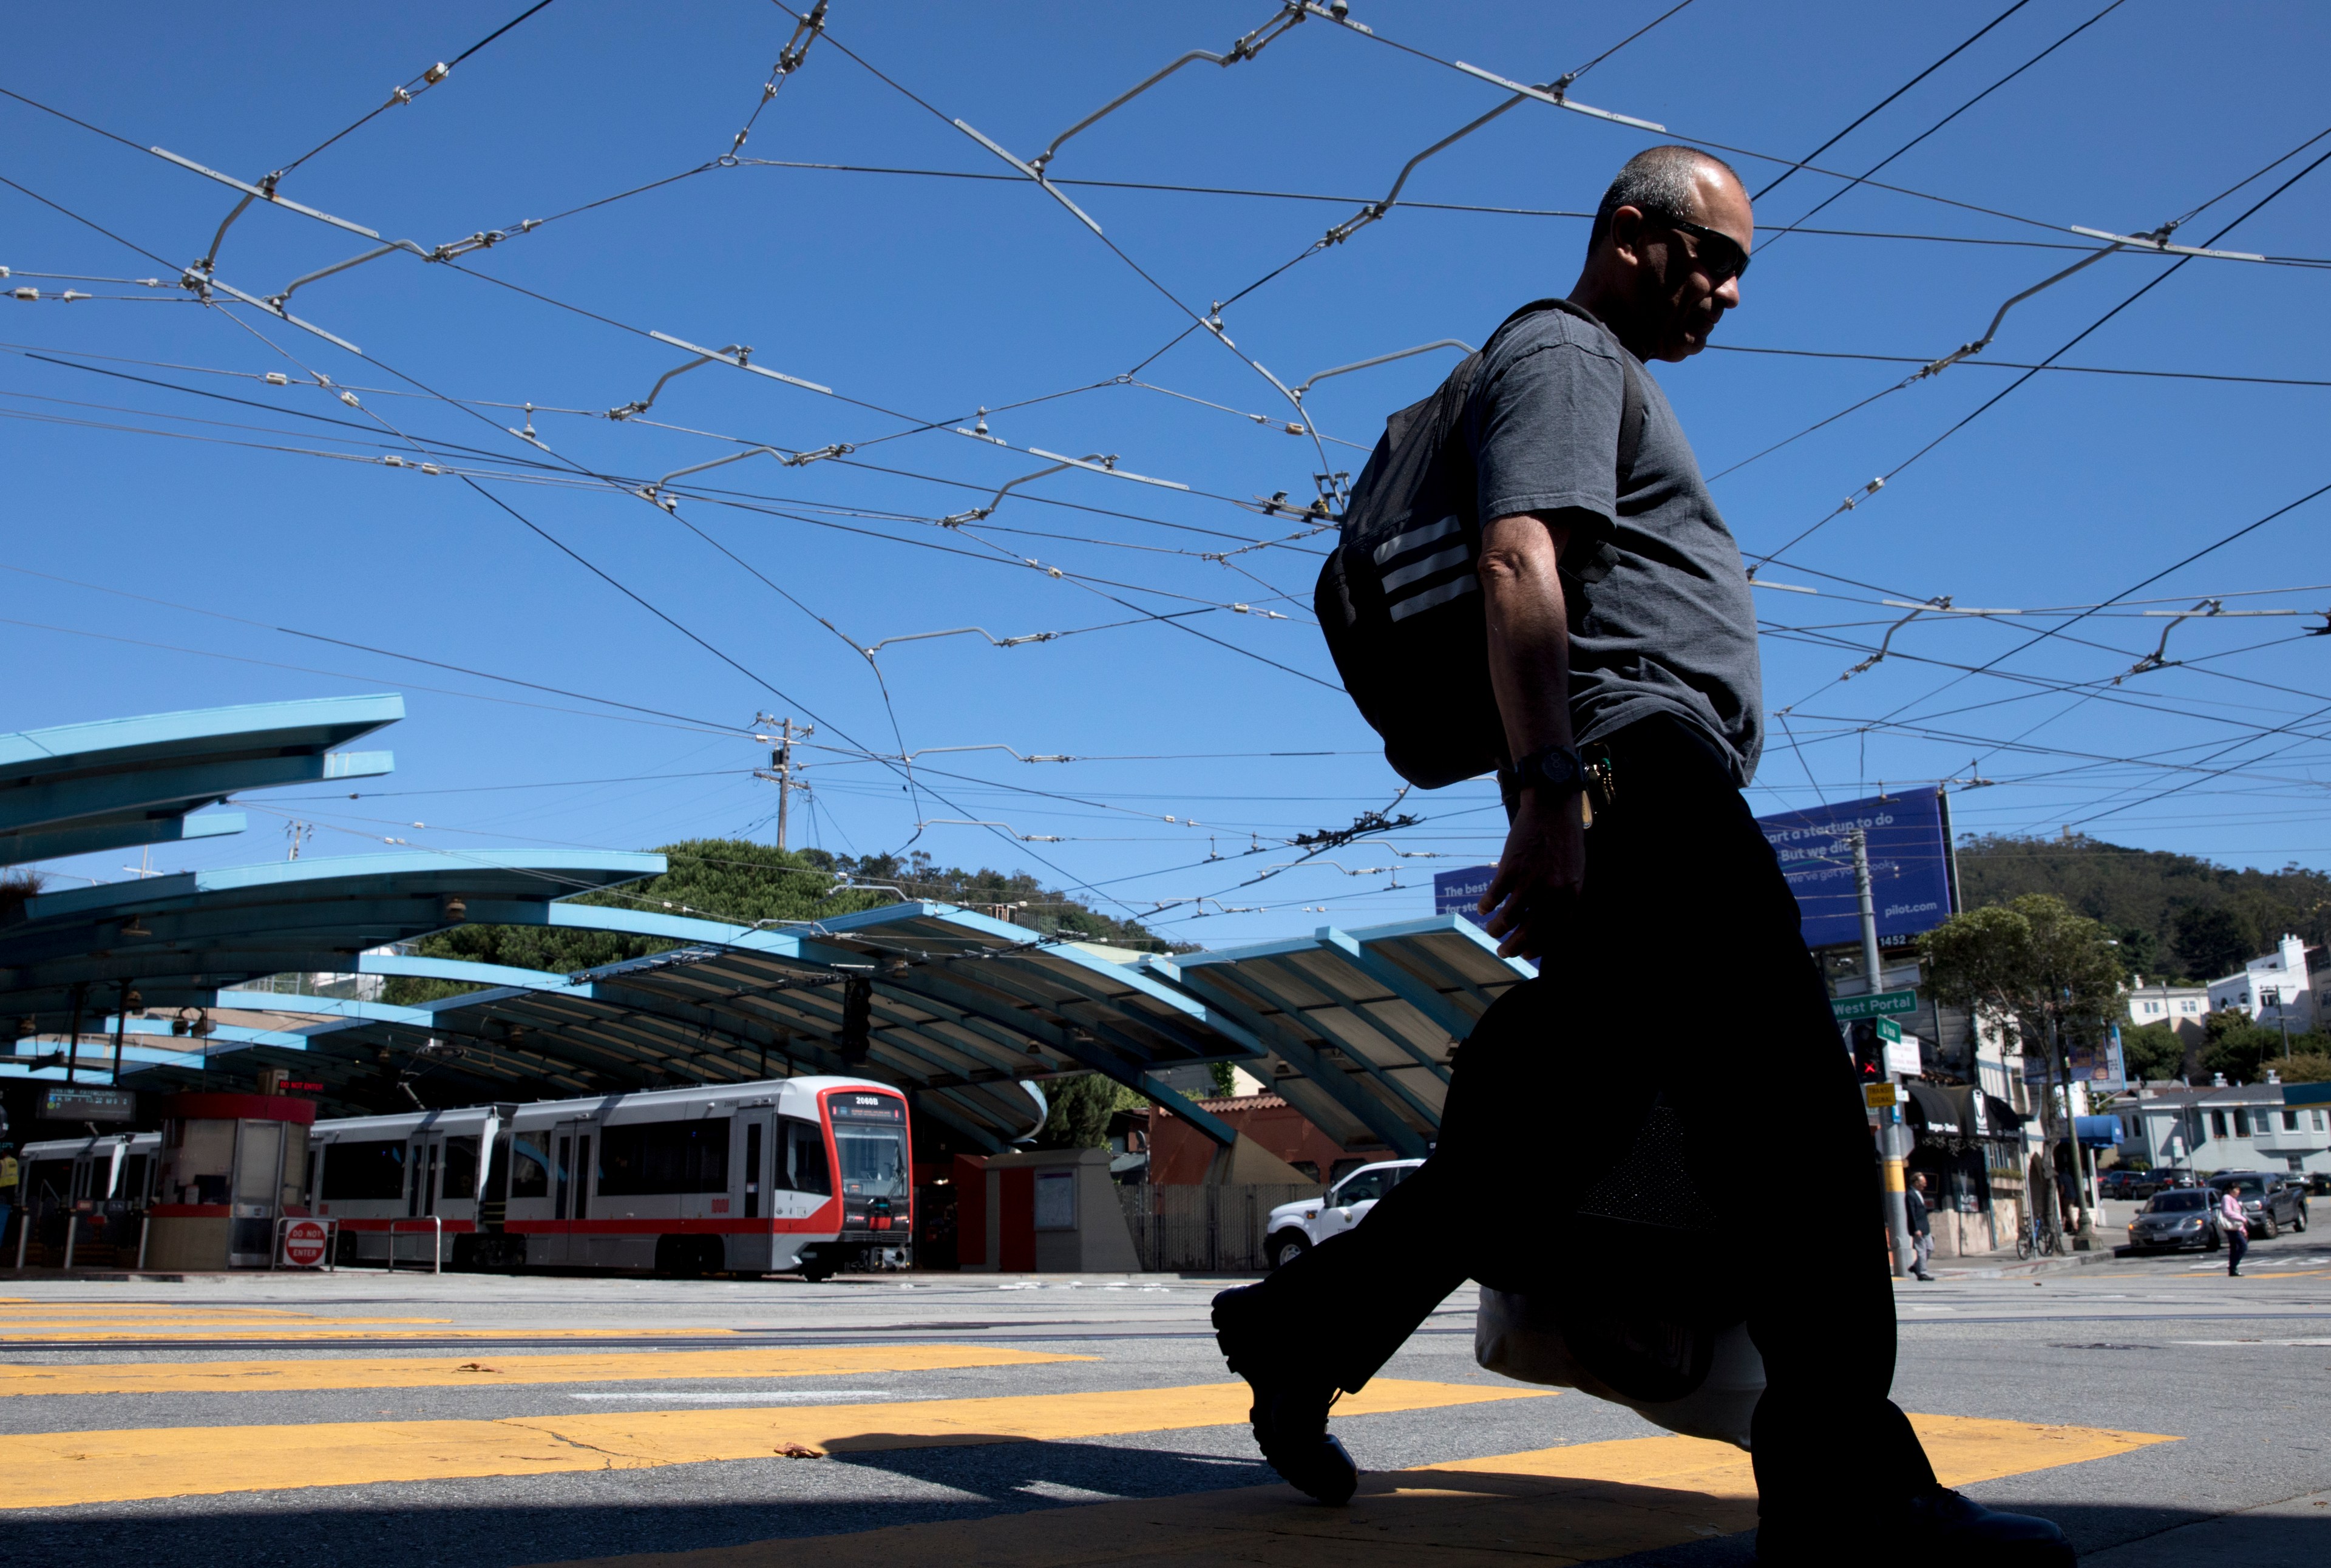 A man walks across a street with a tram station and overhead wires in the background.